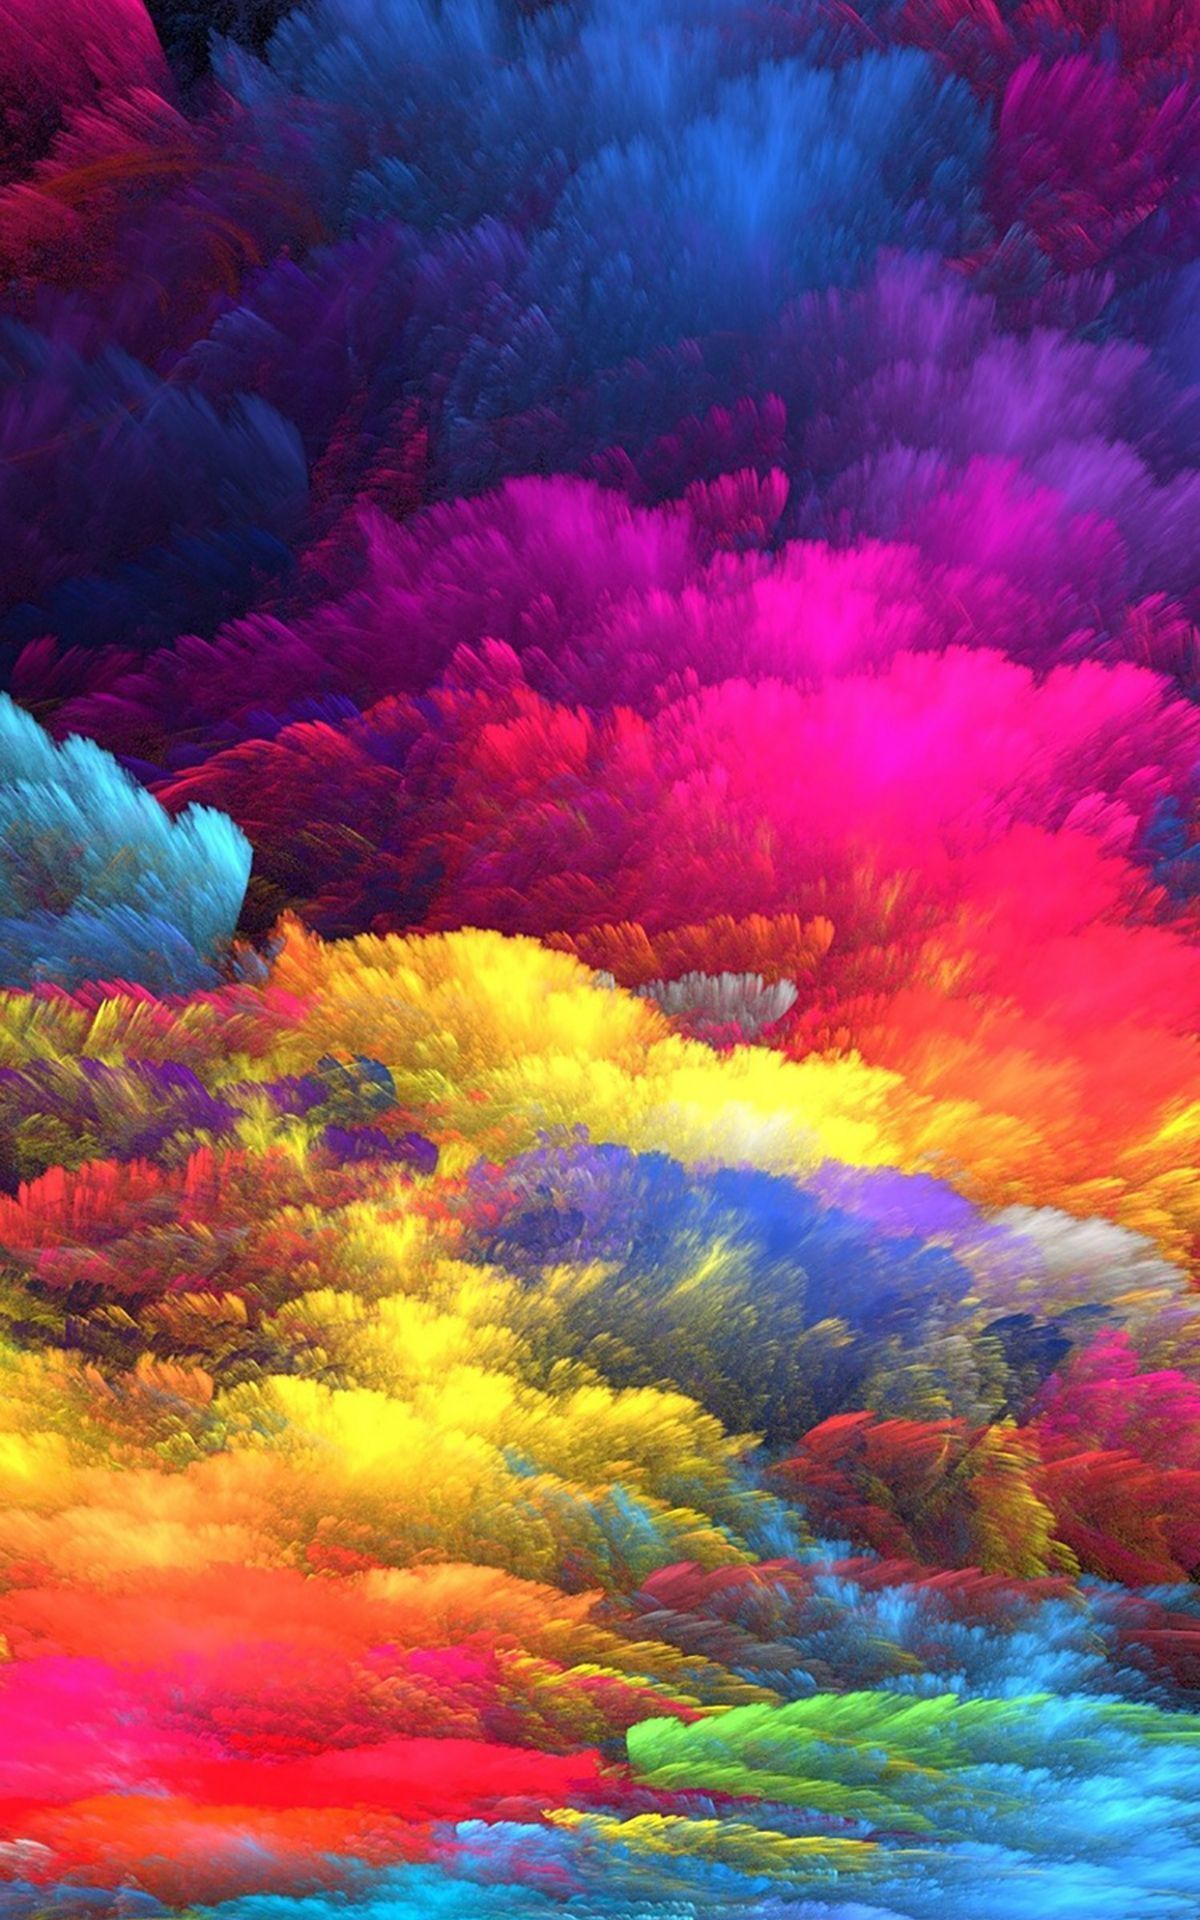 Colorful abstract wallpaper for your iPhone from Vibe app - Colorful, watercolor